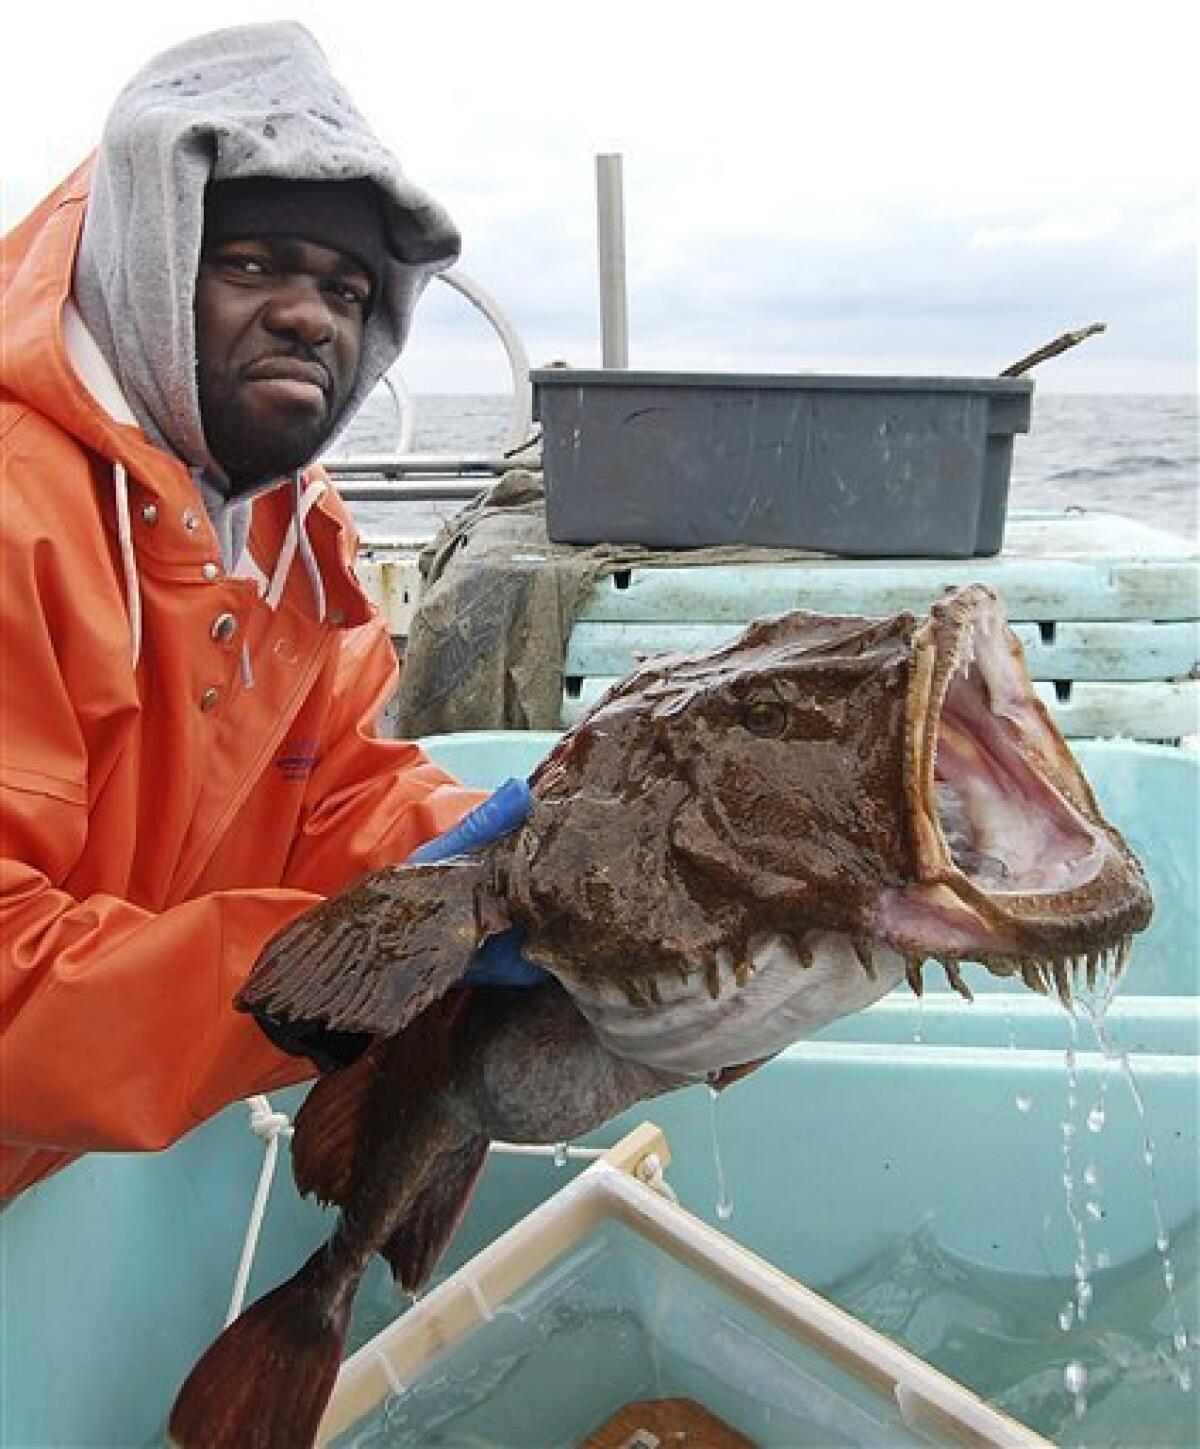 In this January 2010 photo provided by the National Oceanic and Atmospheric Administration's Northeast Fisheries Science Center, Larry Alade, of the National Oceanic and Atmospheric Administration's†Northeast Fisheries Science Center in Woods Hole, Mass., prepares to release a tagged monkfish into the North Atlantic Ocean off the coast of southern New England. The Monkfish Defense Fund argued in a July 2012 letter that the lack of monkfish information has led federal regulators to impose unneeded restrictions that are suppressing the catch on an abundant species. (AP Photo/National Oceanic and Atmospheric Administration's Northeast Fisheries Science Center)